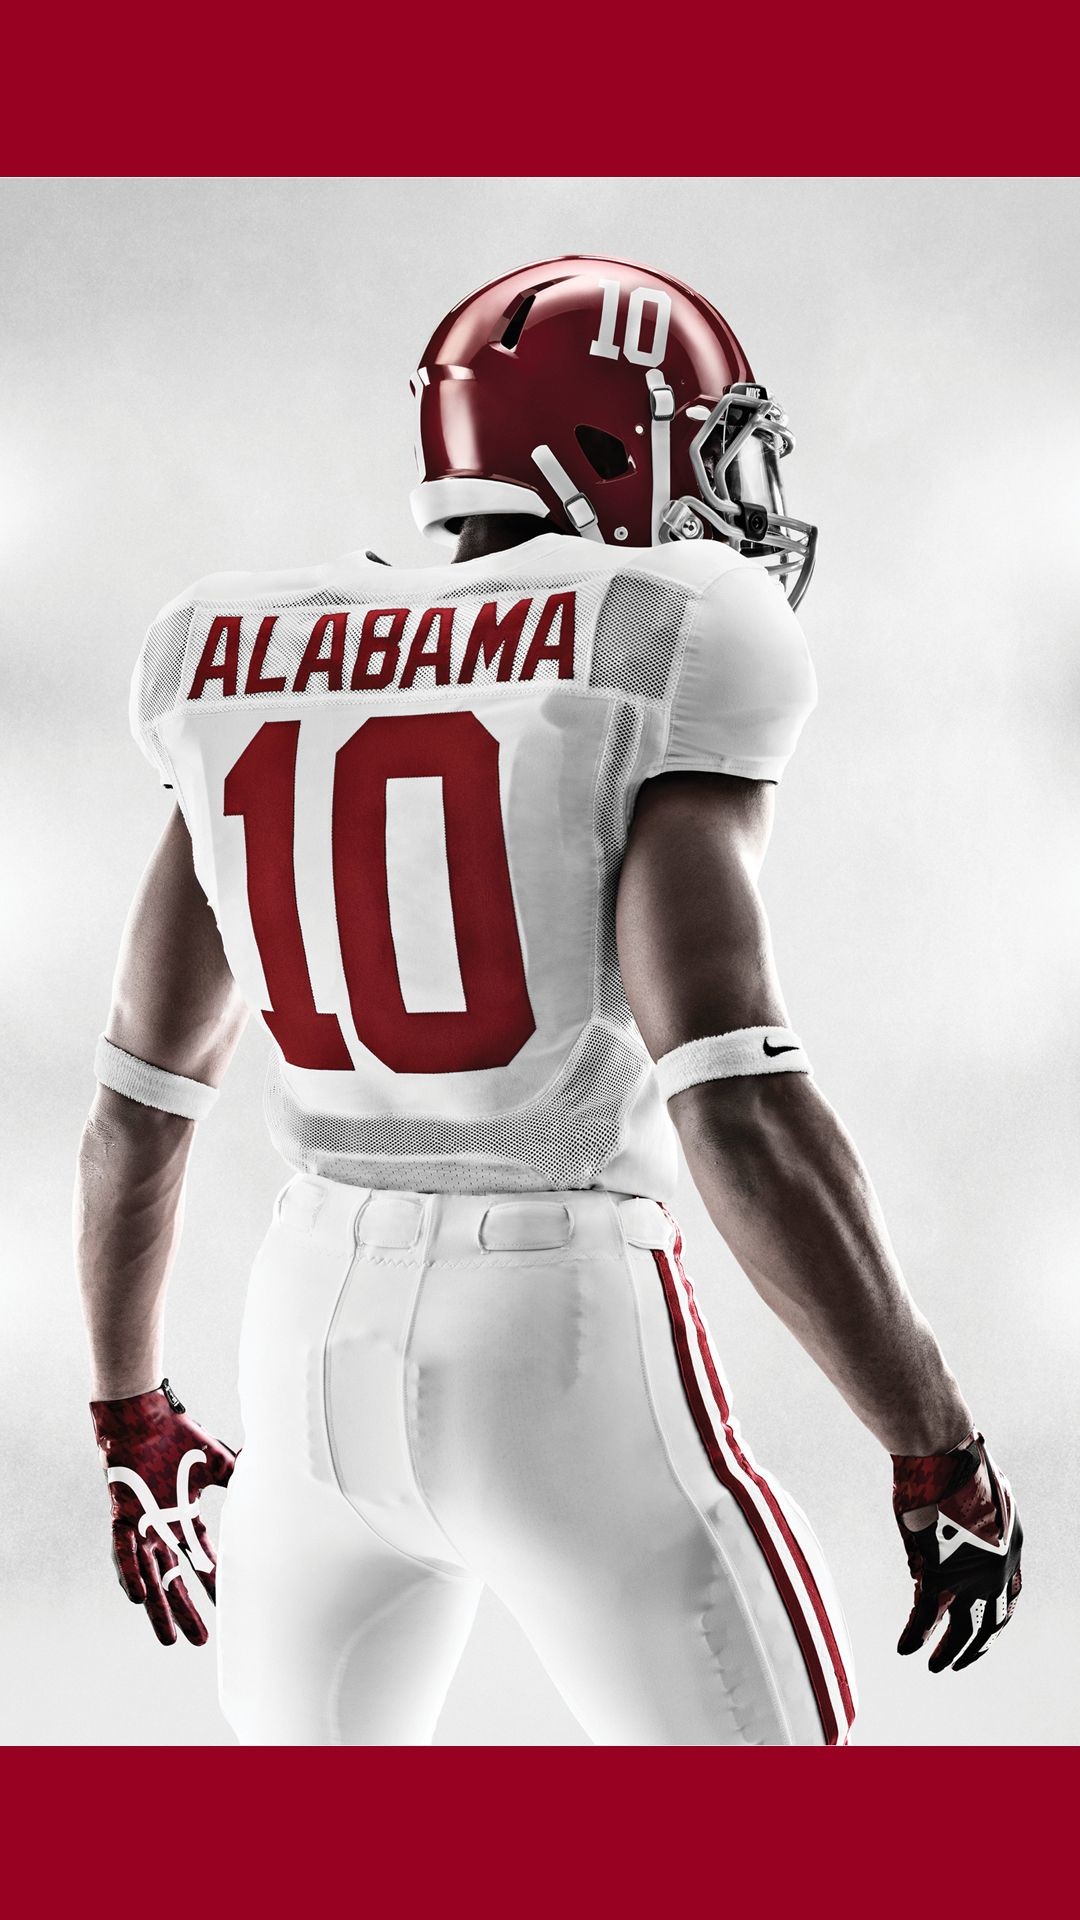 1080x1920 Free Alabama Wallpapers For Mobile Phones with #10 Nike Jersey